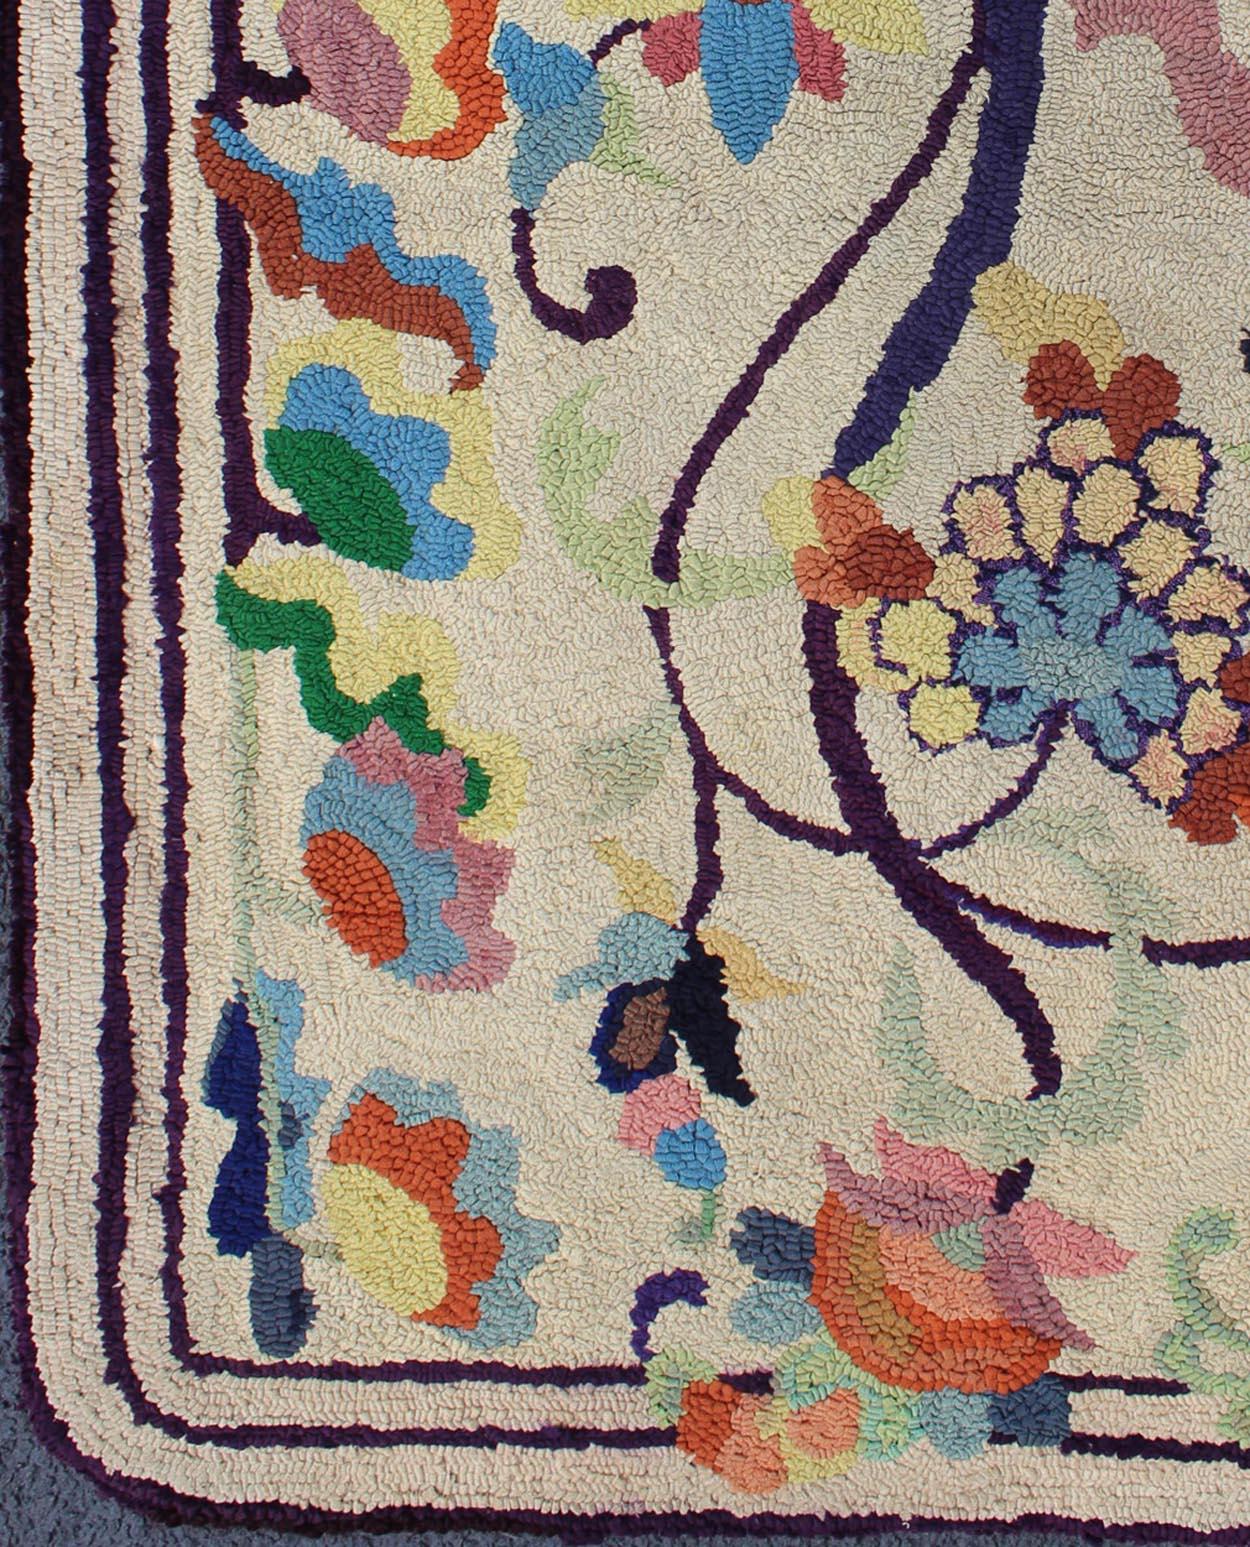 Colorful vintage American hooked rug with branching rainbow-colored flowers, rug l11-0902, country of origin / type: United States / Hooked, circa 1930

This colorful vintage American Hooked rug depicts a variety of vining flowers in an assorted